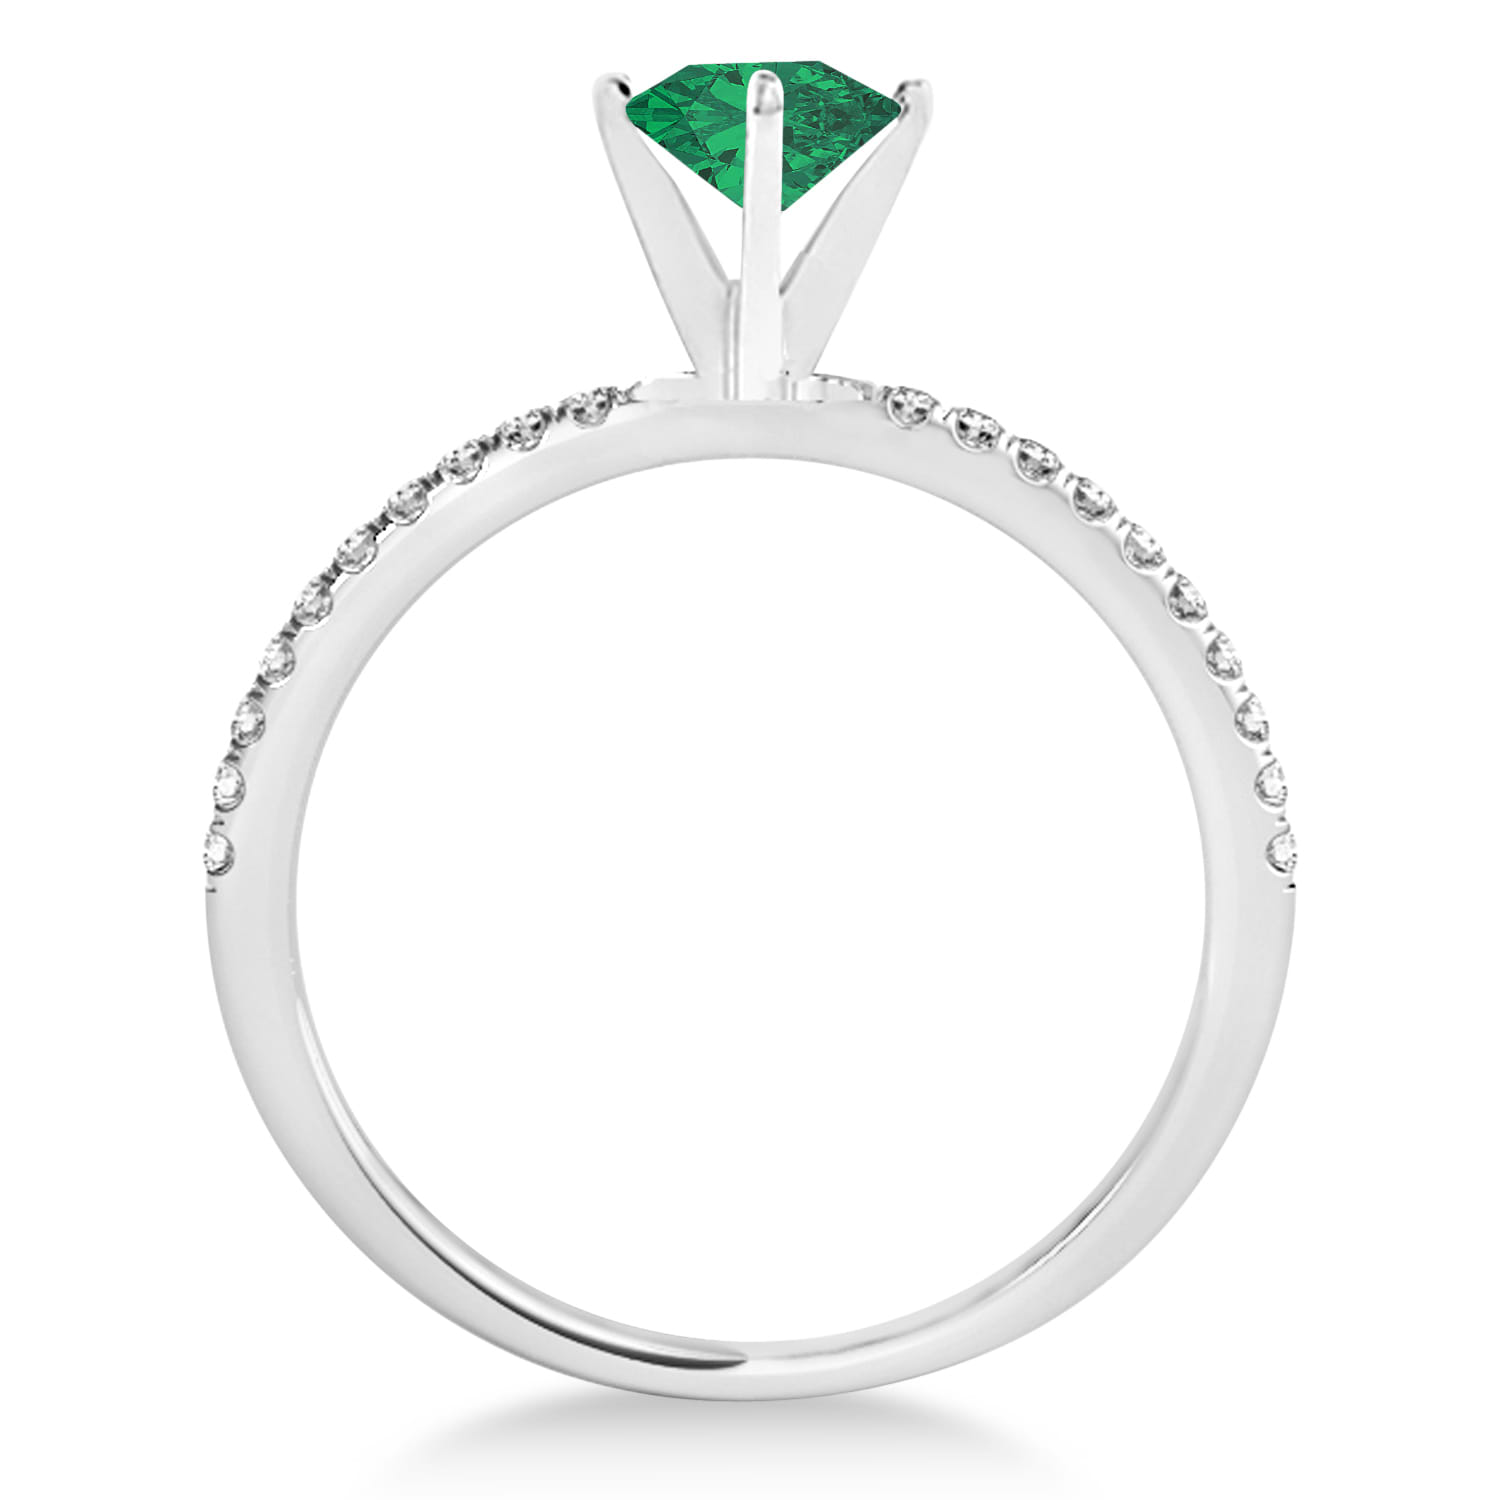 Emerald & Diamond Accented Oval Shape Engagement Ring 18k White Gold (1.50ct)